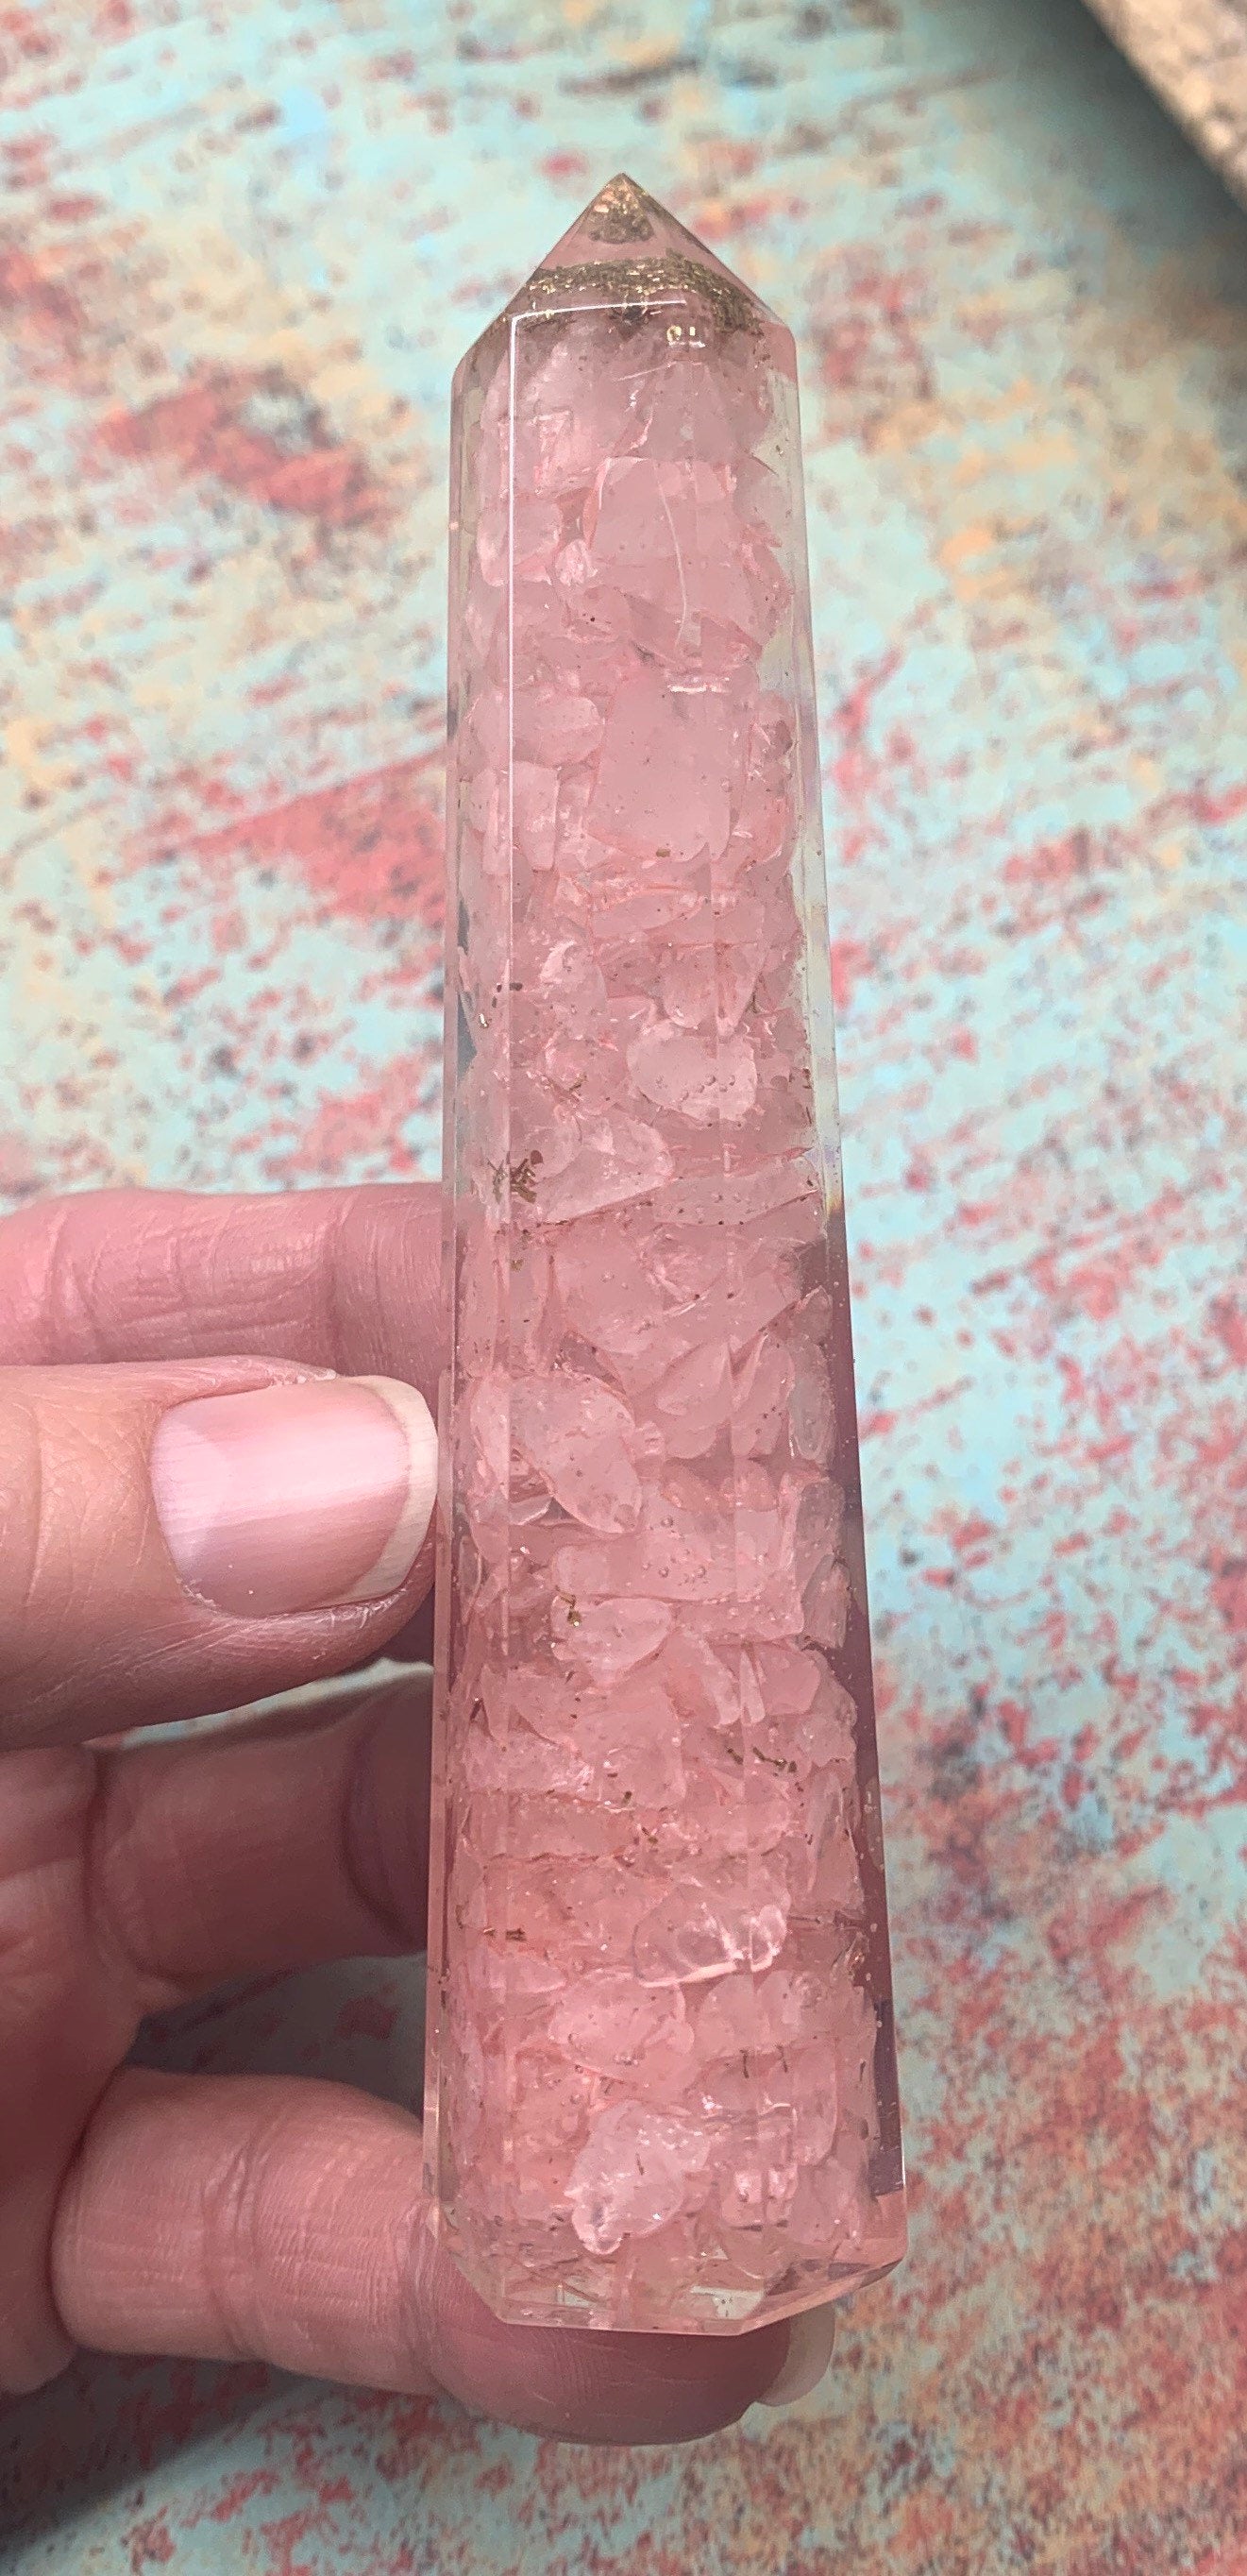 Rose Quartz Organite Obelisk, 4 1/2" Beautiful, Unconditional Love Stone 0848 (Crystals Imbedded in Resin)